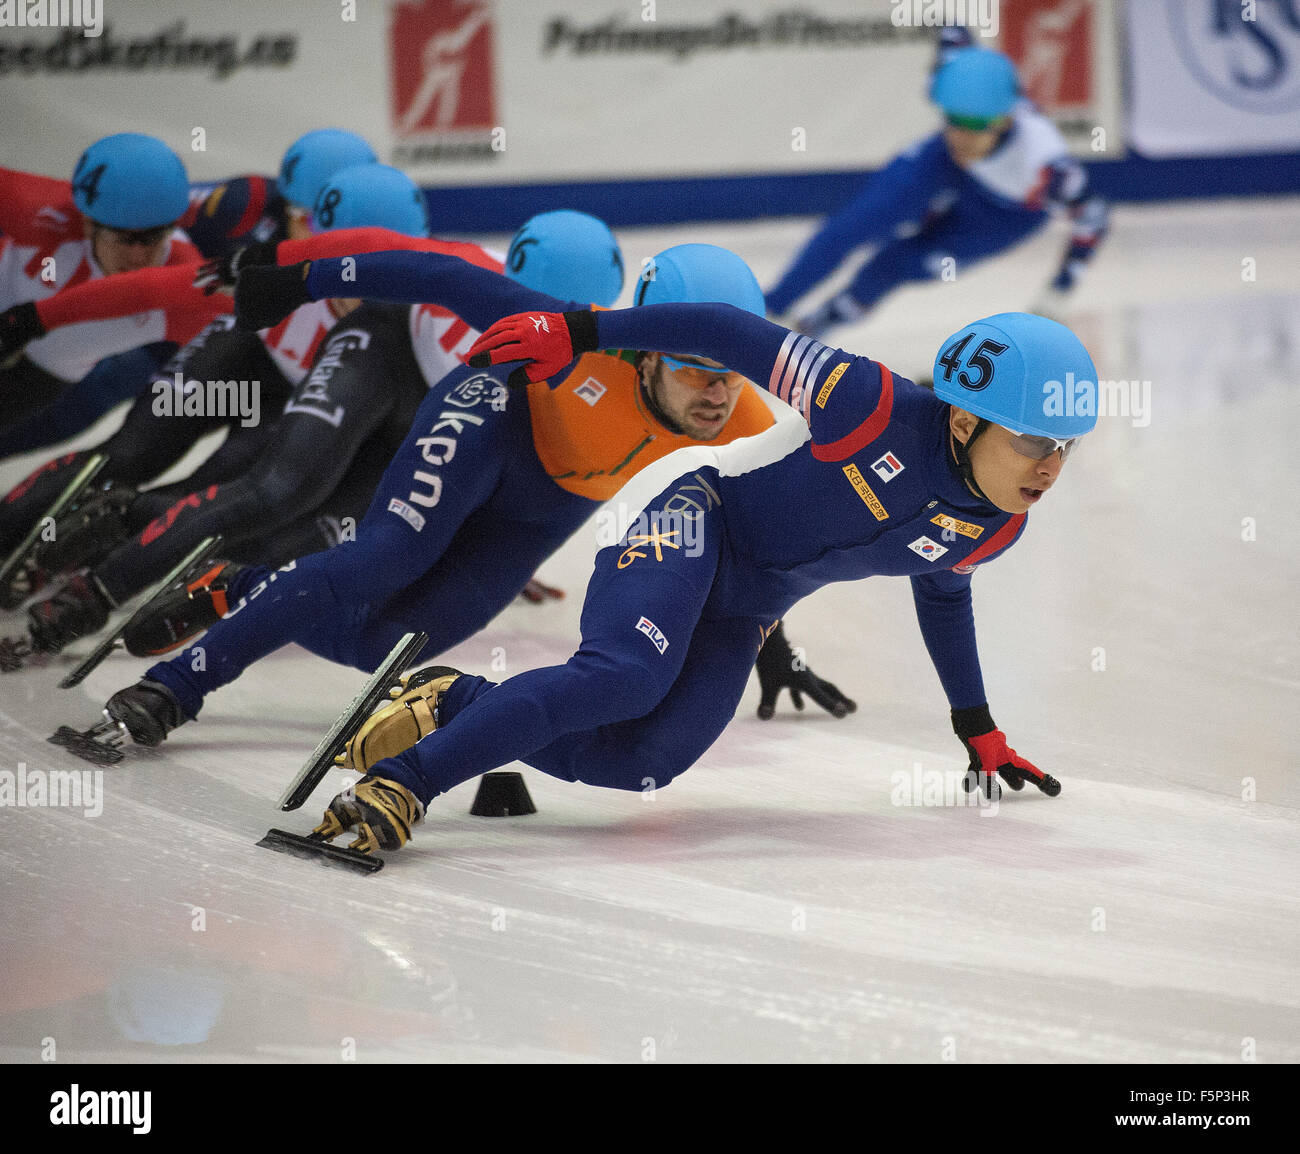 Toronto, Canada. 7 November 2015: ISU World Cup Short Track, Toronto - Yoon-Gy Kwak (45) (KOR) on his way to victory in the men's 1500m final. Photo: Peter Llewellyn/Alamy Live News Stock Photo